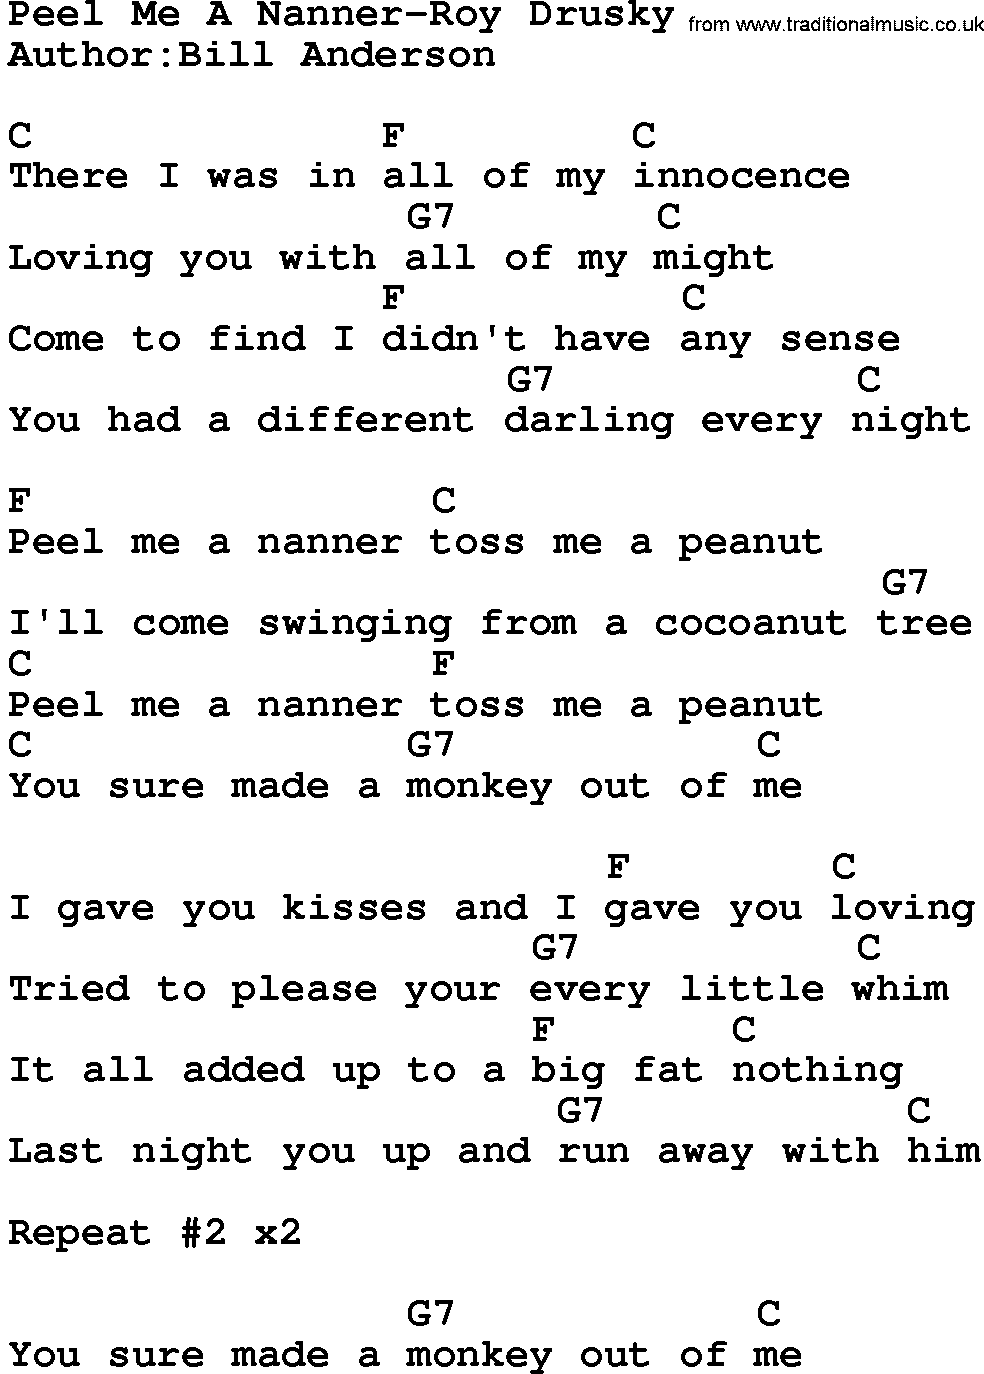 Country music song: Peel Me A Nanner-Roy Drusky lyrics and chords